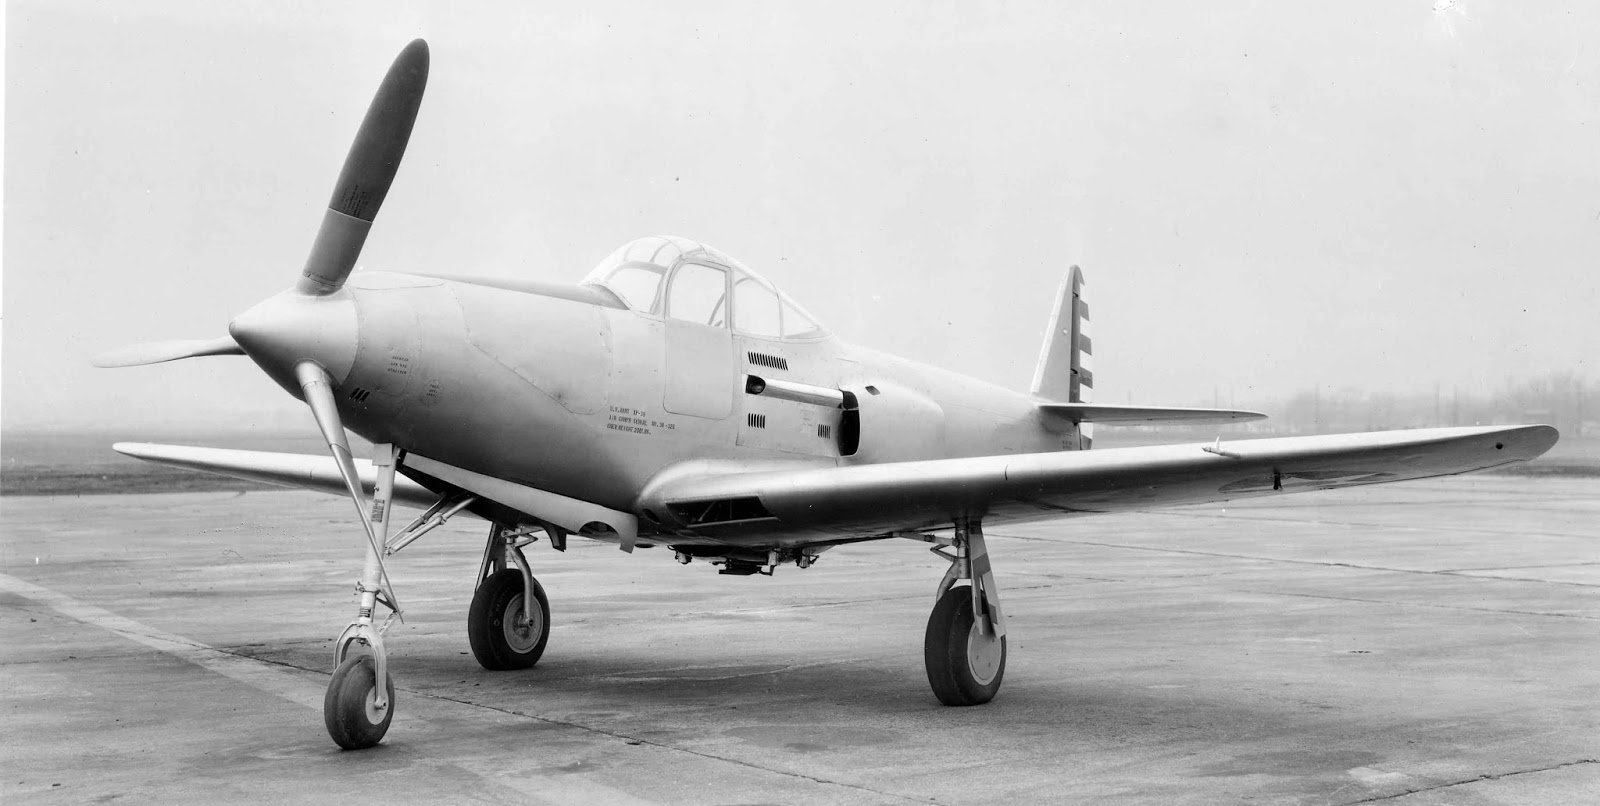 The Bell XP-39 prototype in the original turbosupercharged configuration. The intercooler and waste gates created significant aerodynamic drag. (Bell Aircraft Corporation)